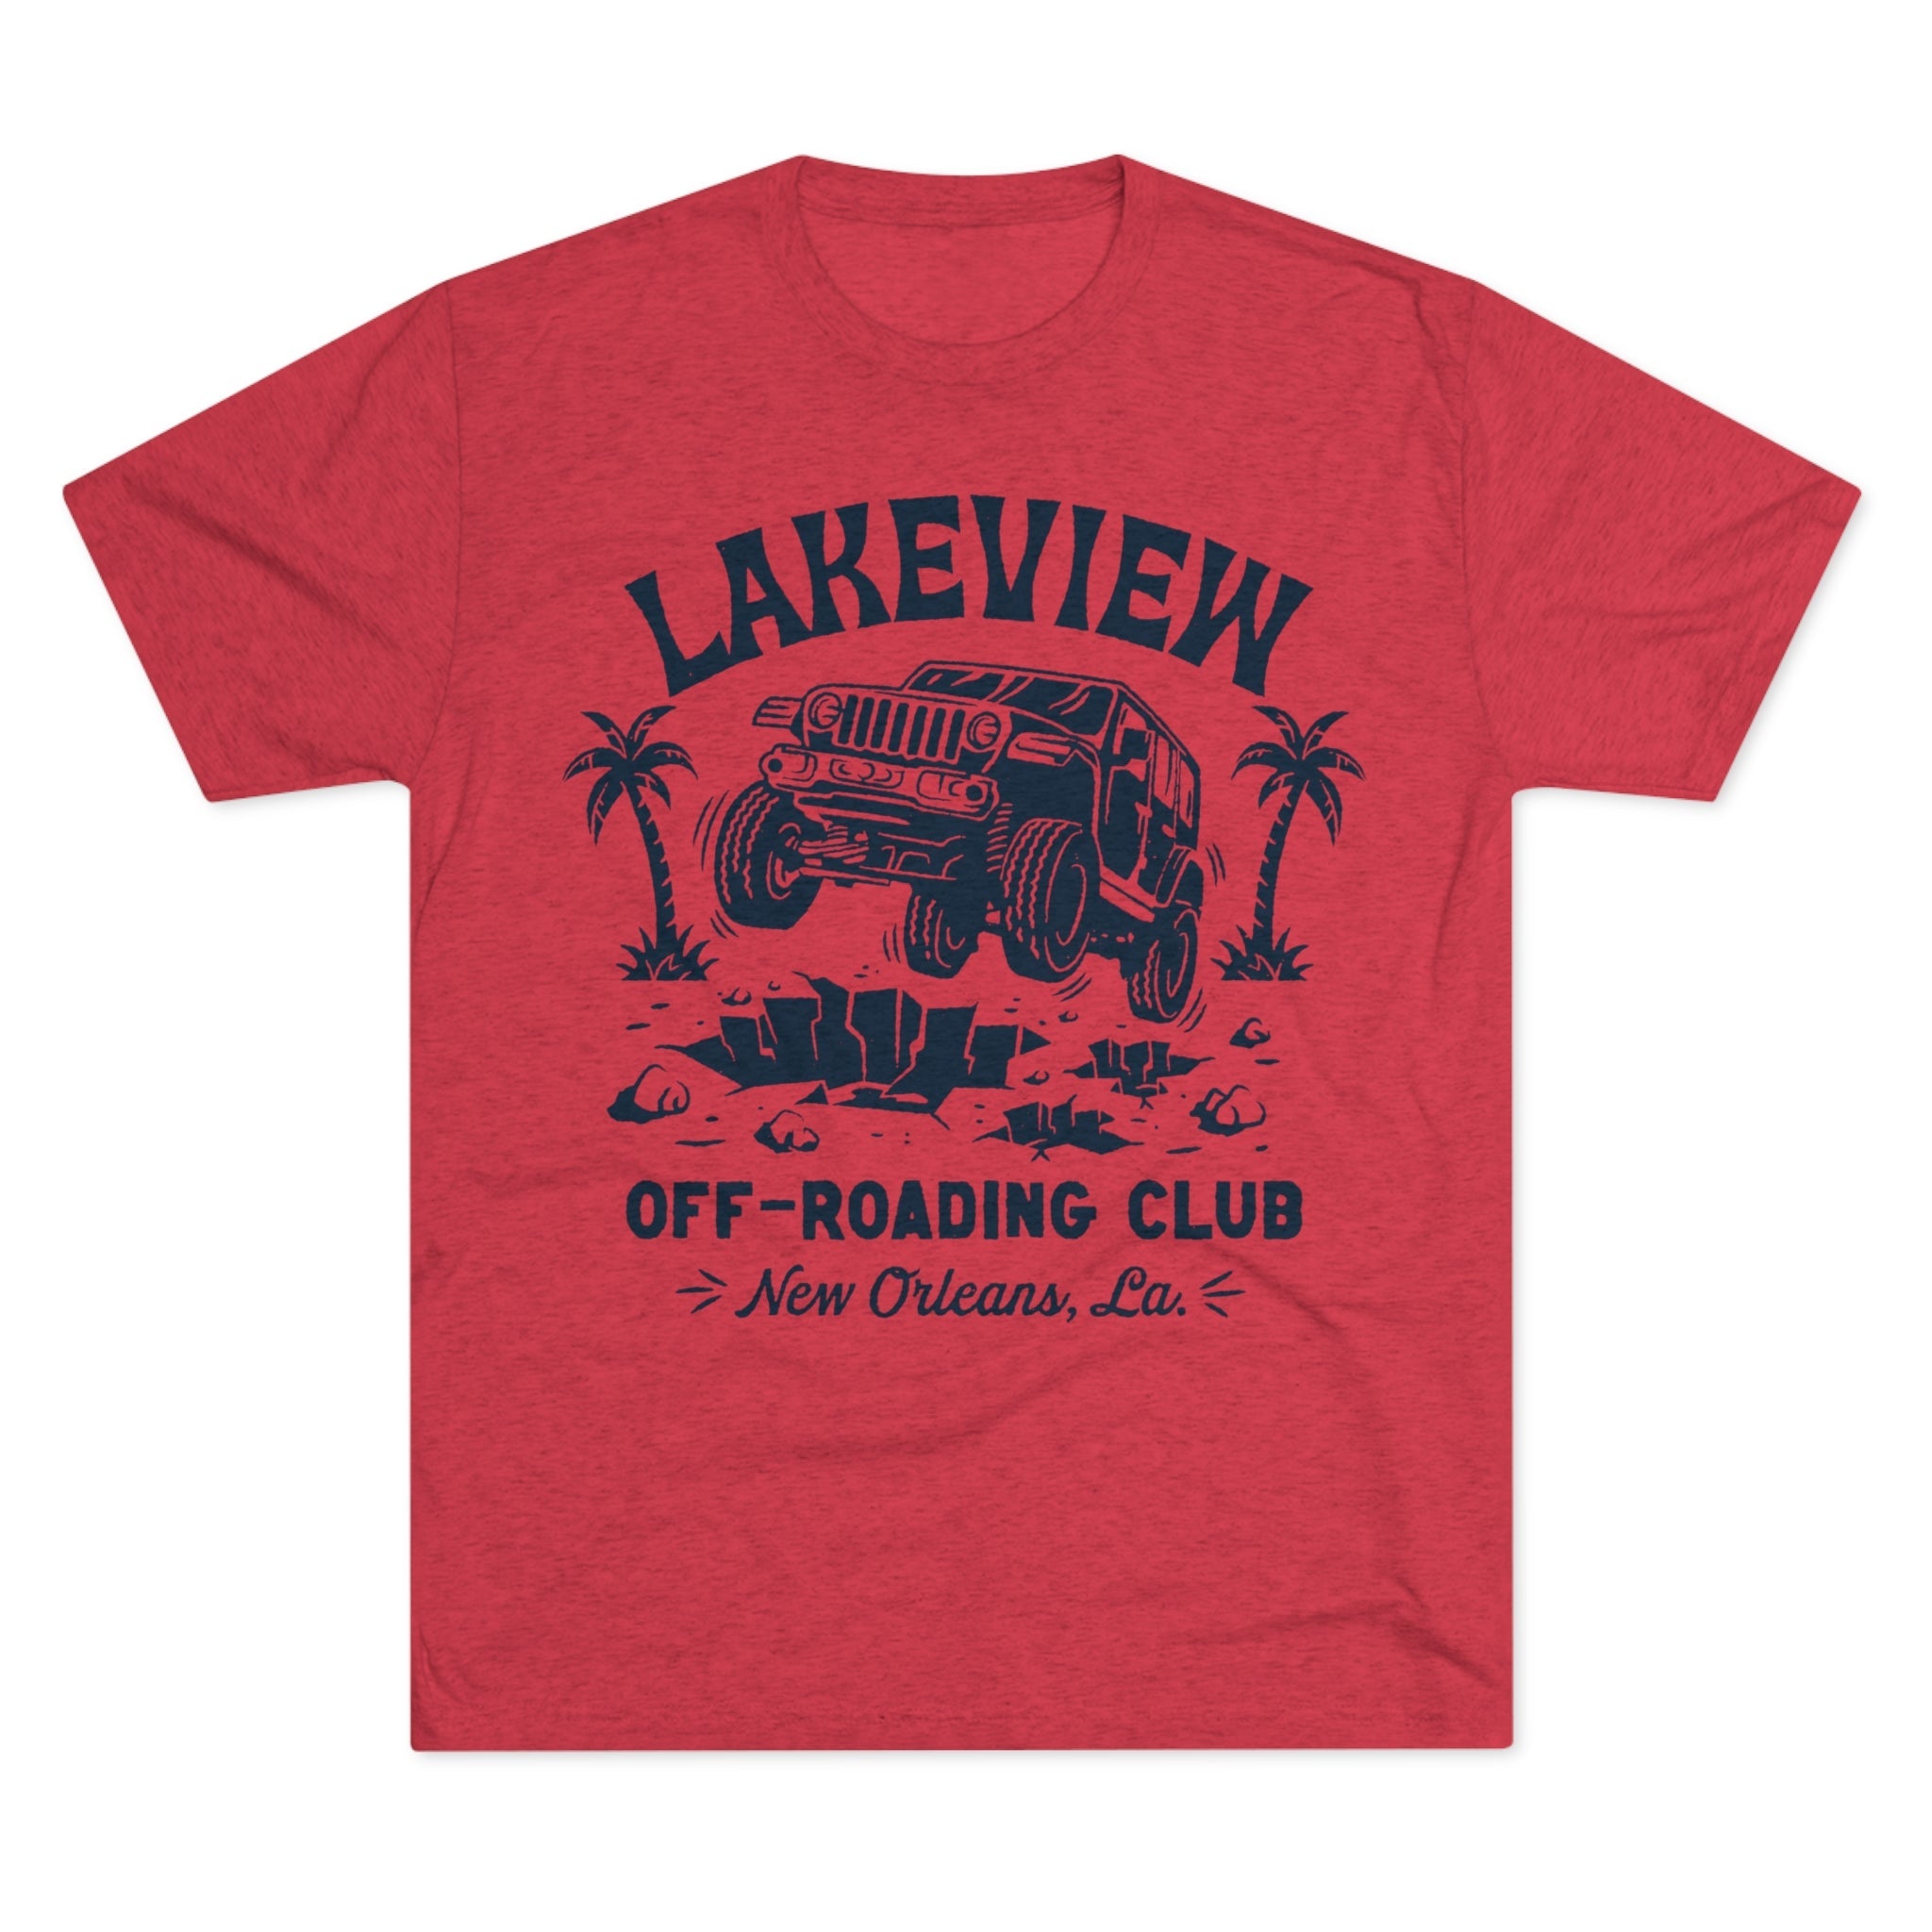 Lakeview Off-Roading Club - Dirty Coast Press